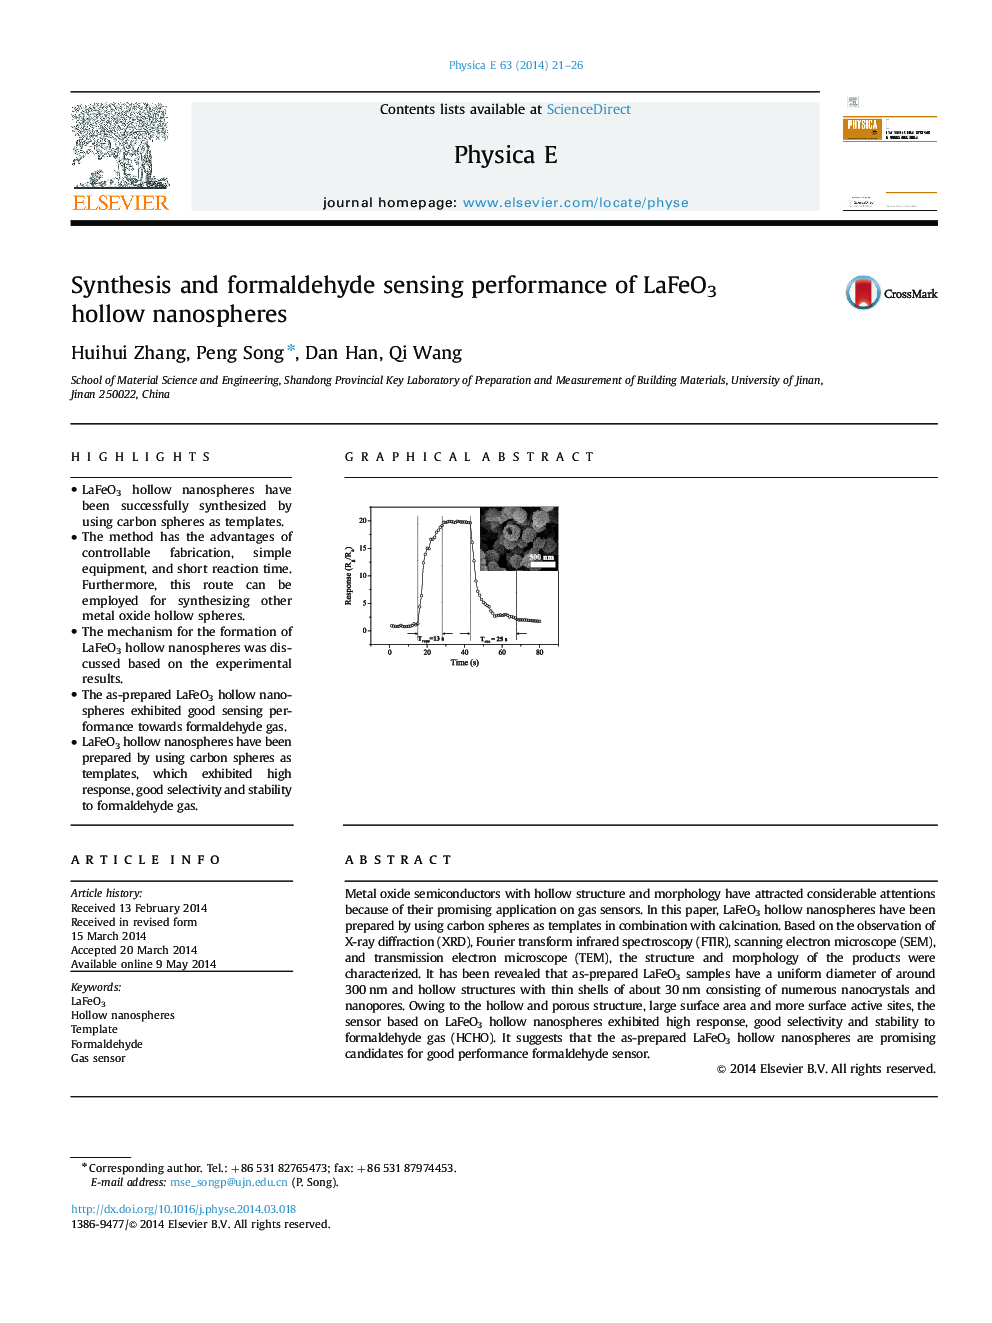 Synthesis and formaldehyde sensing performance of LaFeO3 hollow nanospheres